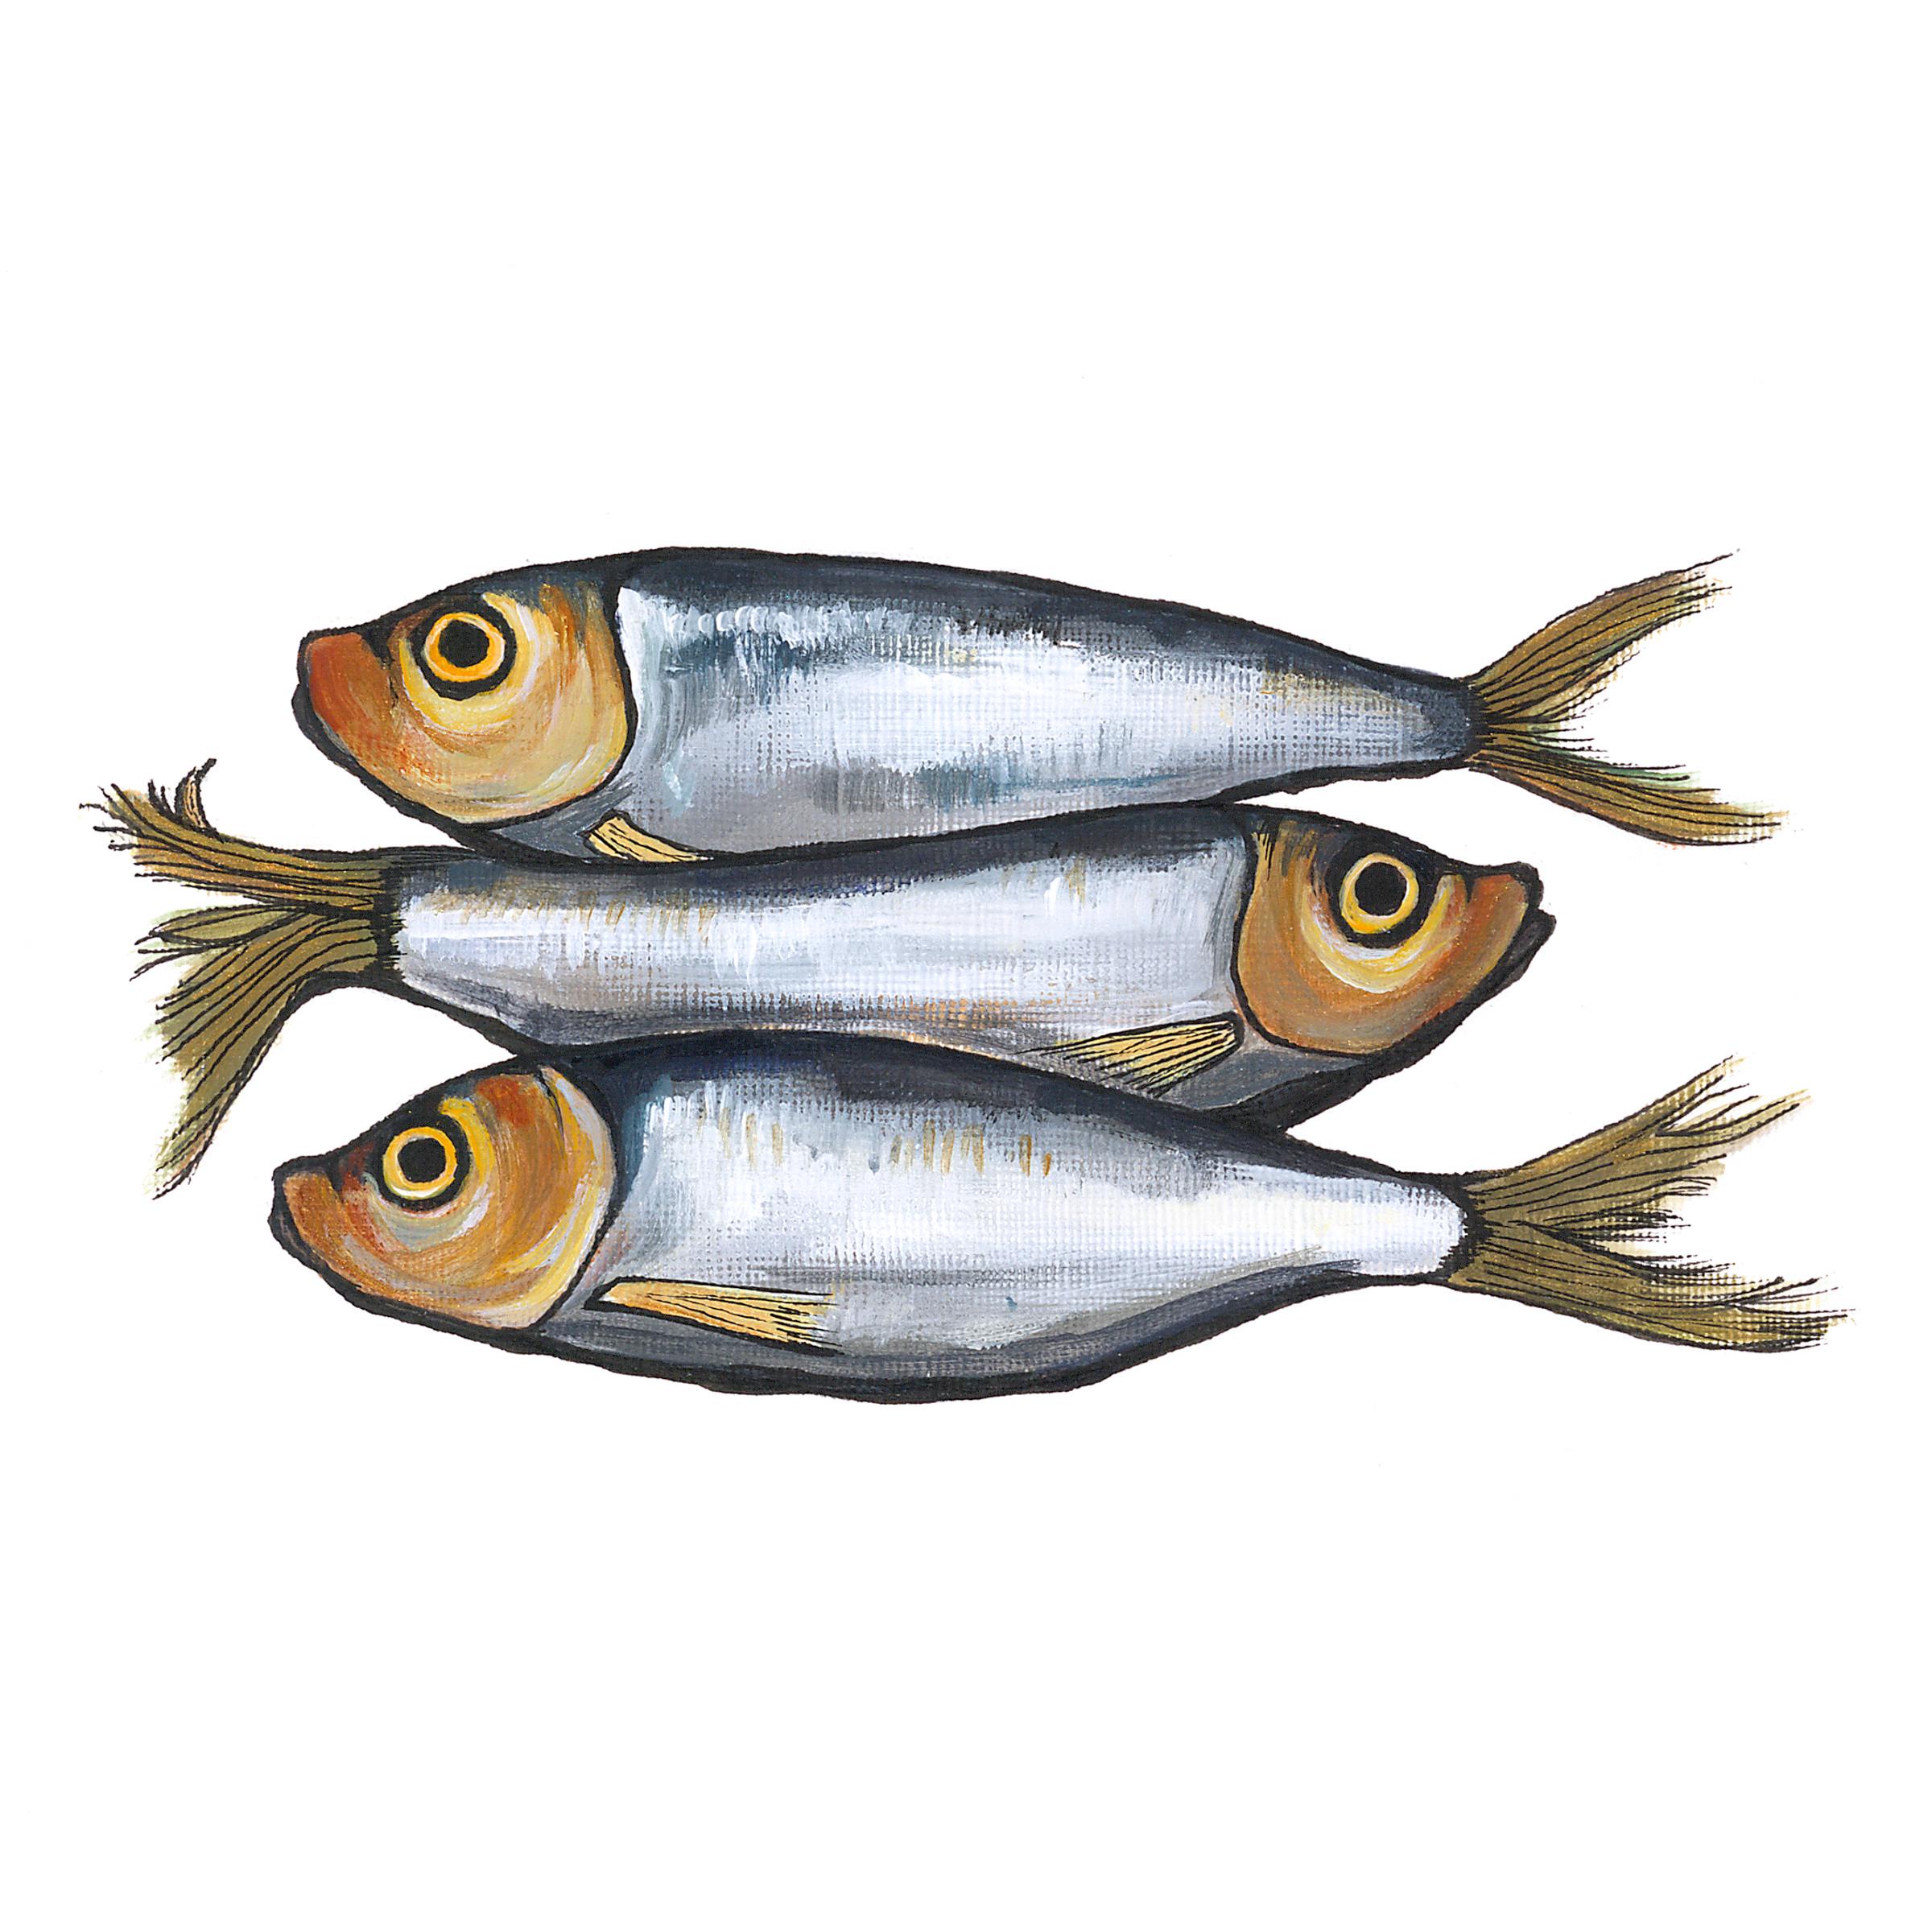 Lucy Routh – Sprats 1

Inspired by nature and the beauty found in everyday objects. I combine traditional still life subjects with a contemporary style, achieving bold, vibrant images with a sense of space and simplicity.

Limited Edition Giclee